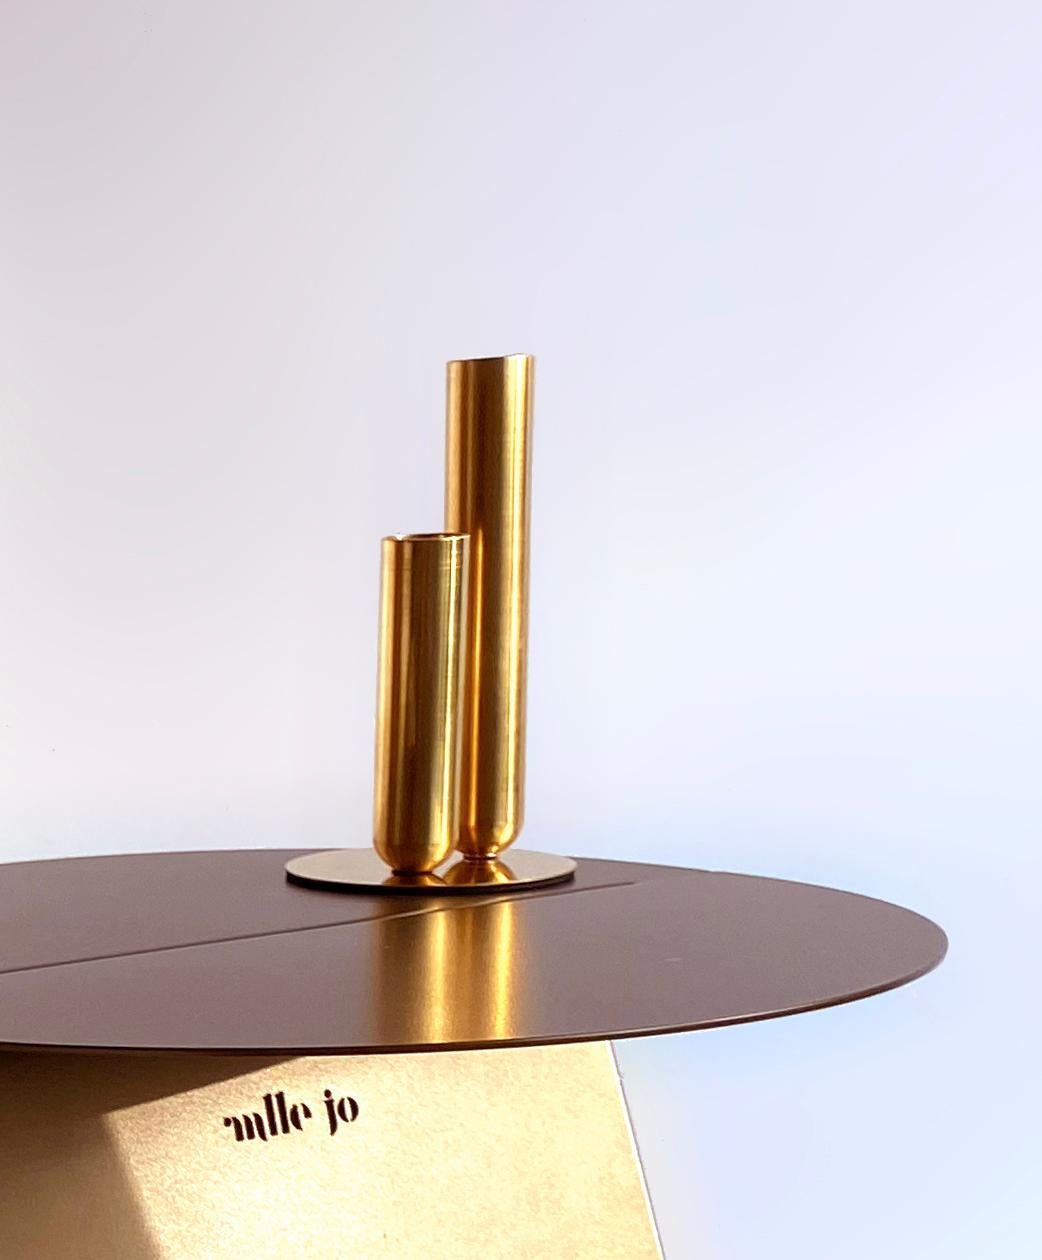 Soliflore Brass Vase by Mademoiselle Jo
Dimensions: Ø 8.5 x H 15 cm.
Materials: Turned brass with magnet and EVA foam tray.

Hollow cylinders of 15 cm and 10 cm, diameter 2.5 cm. Plate diameter of 8.5 cm. Metal version with matt white or black